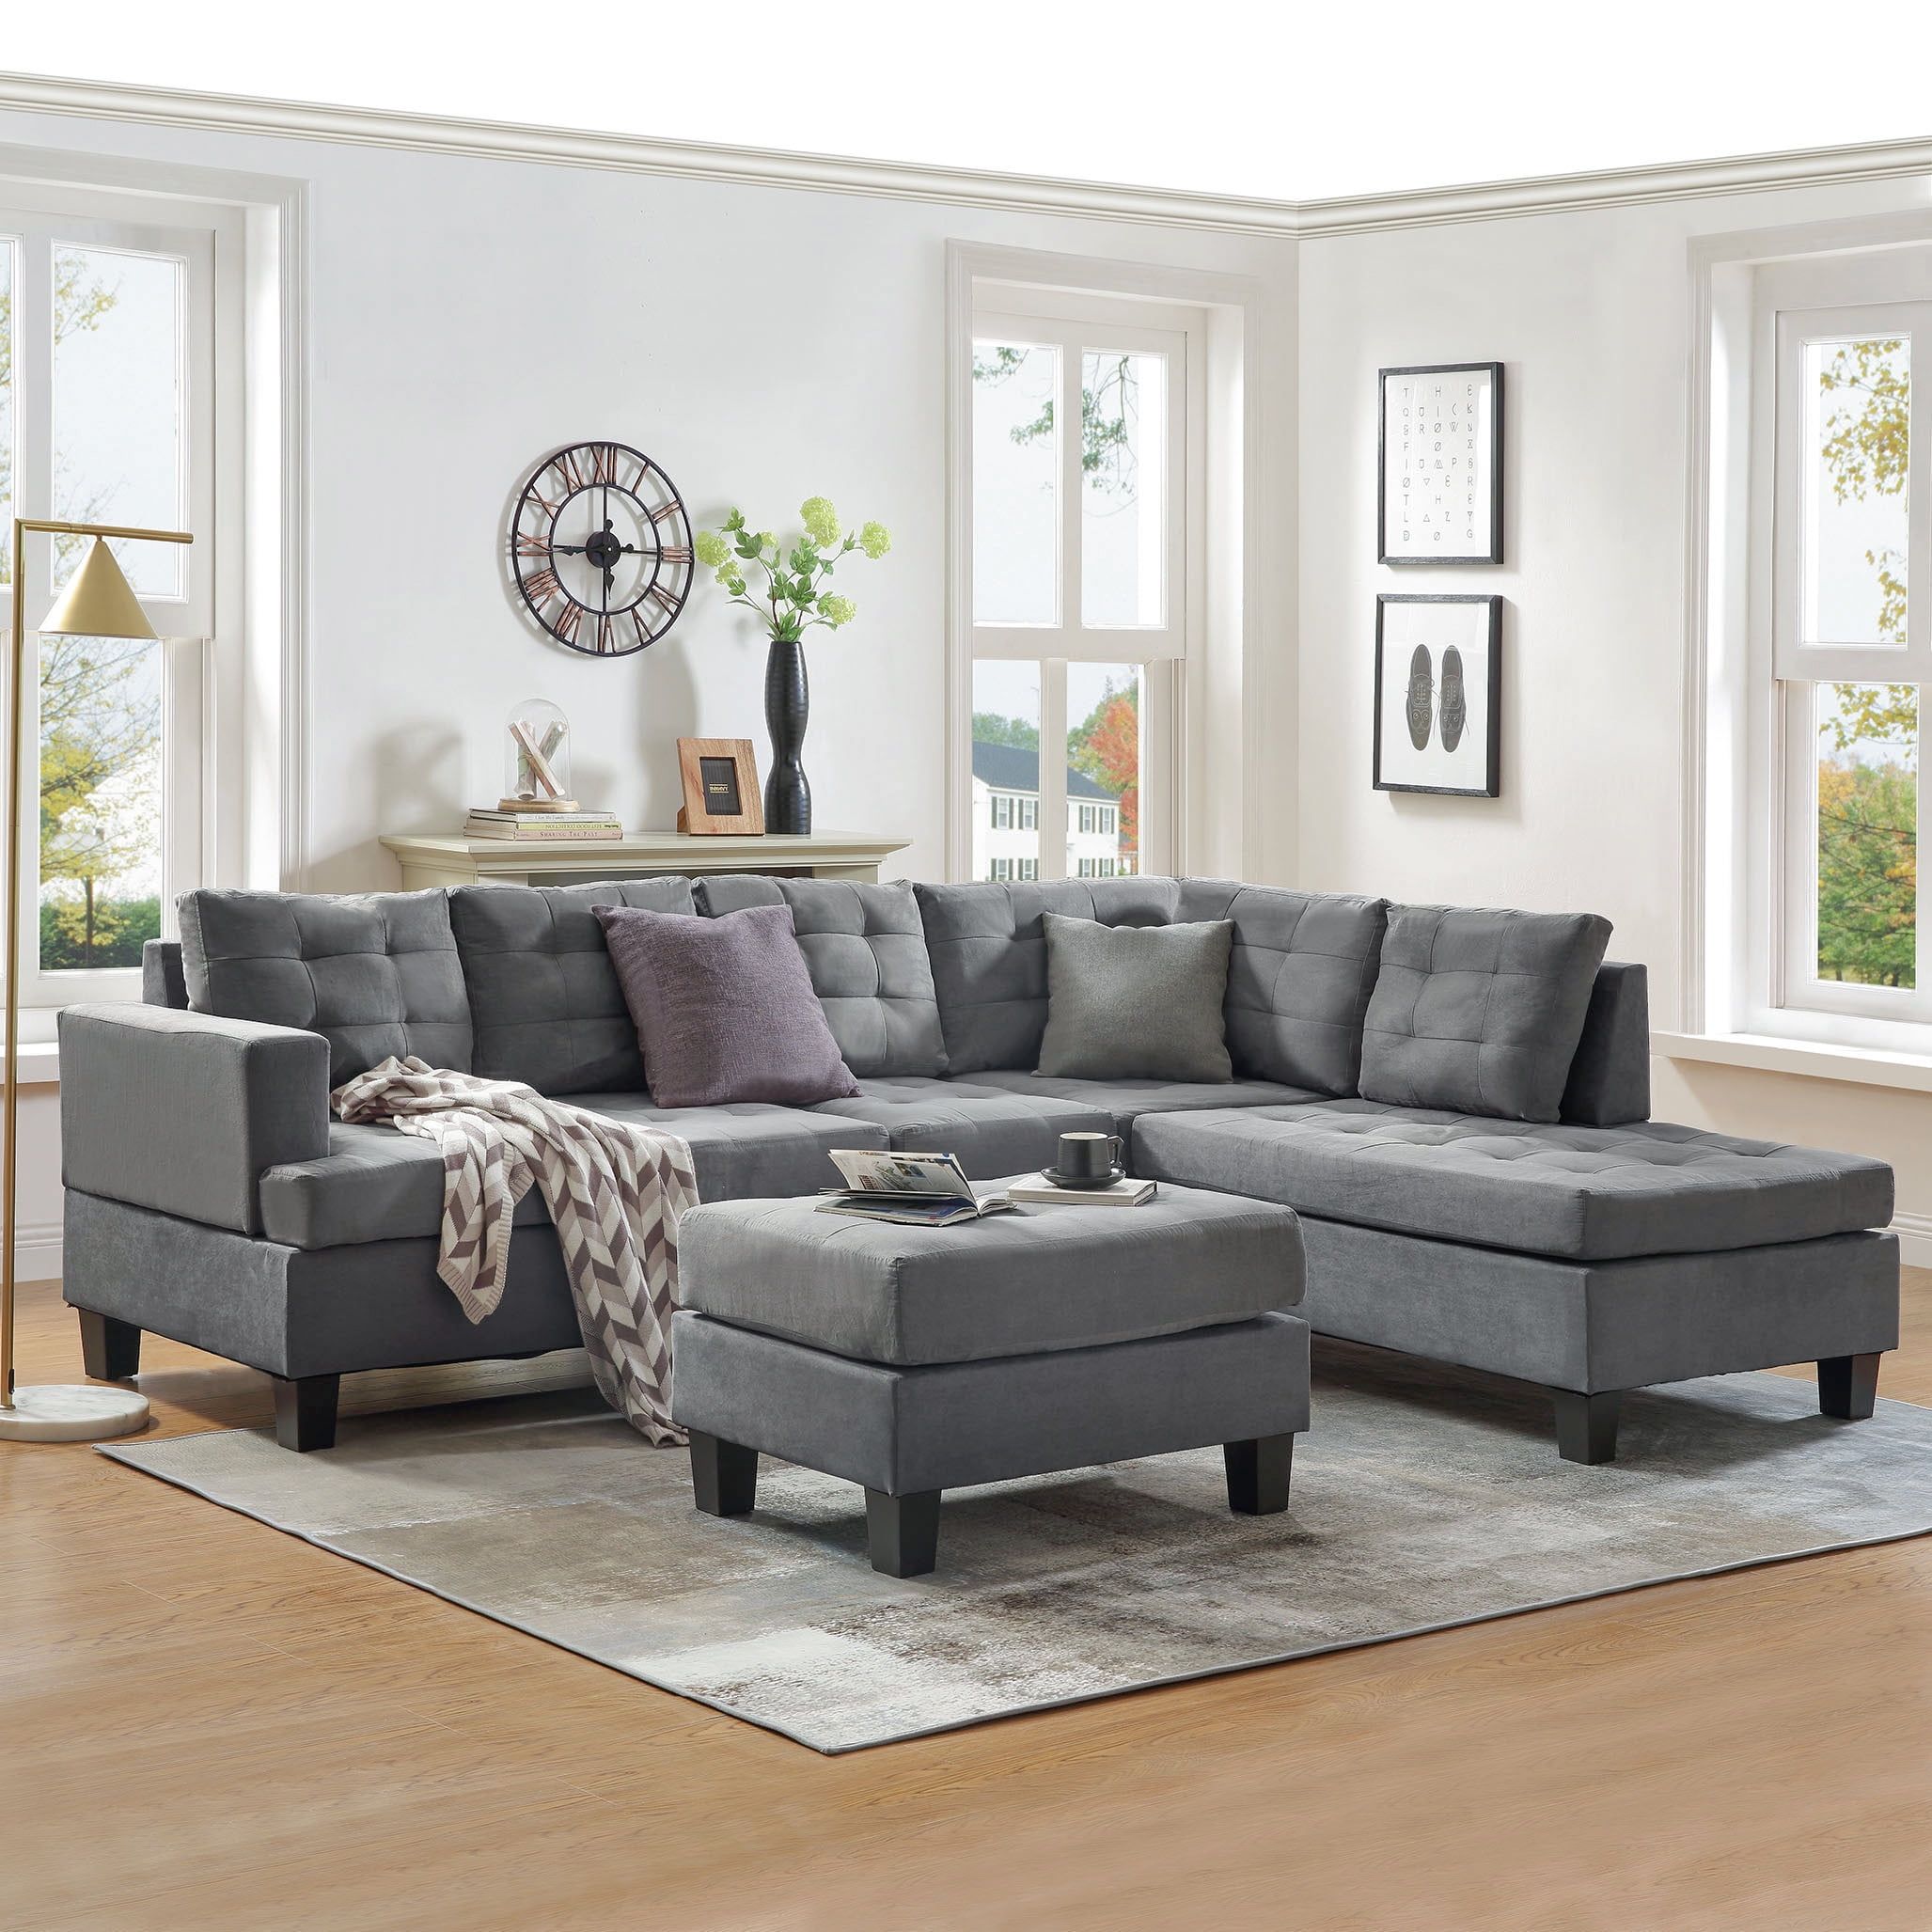 Urhomepro L Shape Mid Century Sofa, 105"w Modern Sectional Sofa With Throughout Modern L Shaped Sofa Sectionals (Gallery 14 of 20)